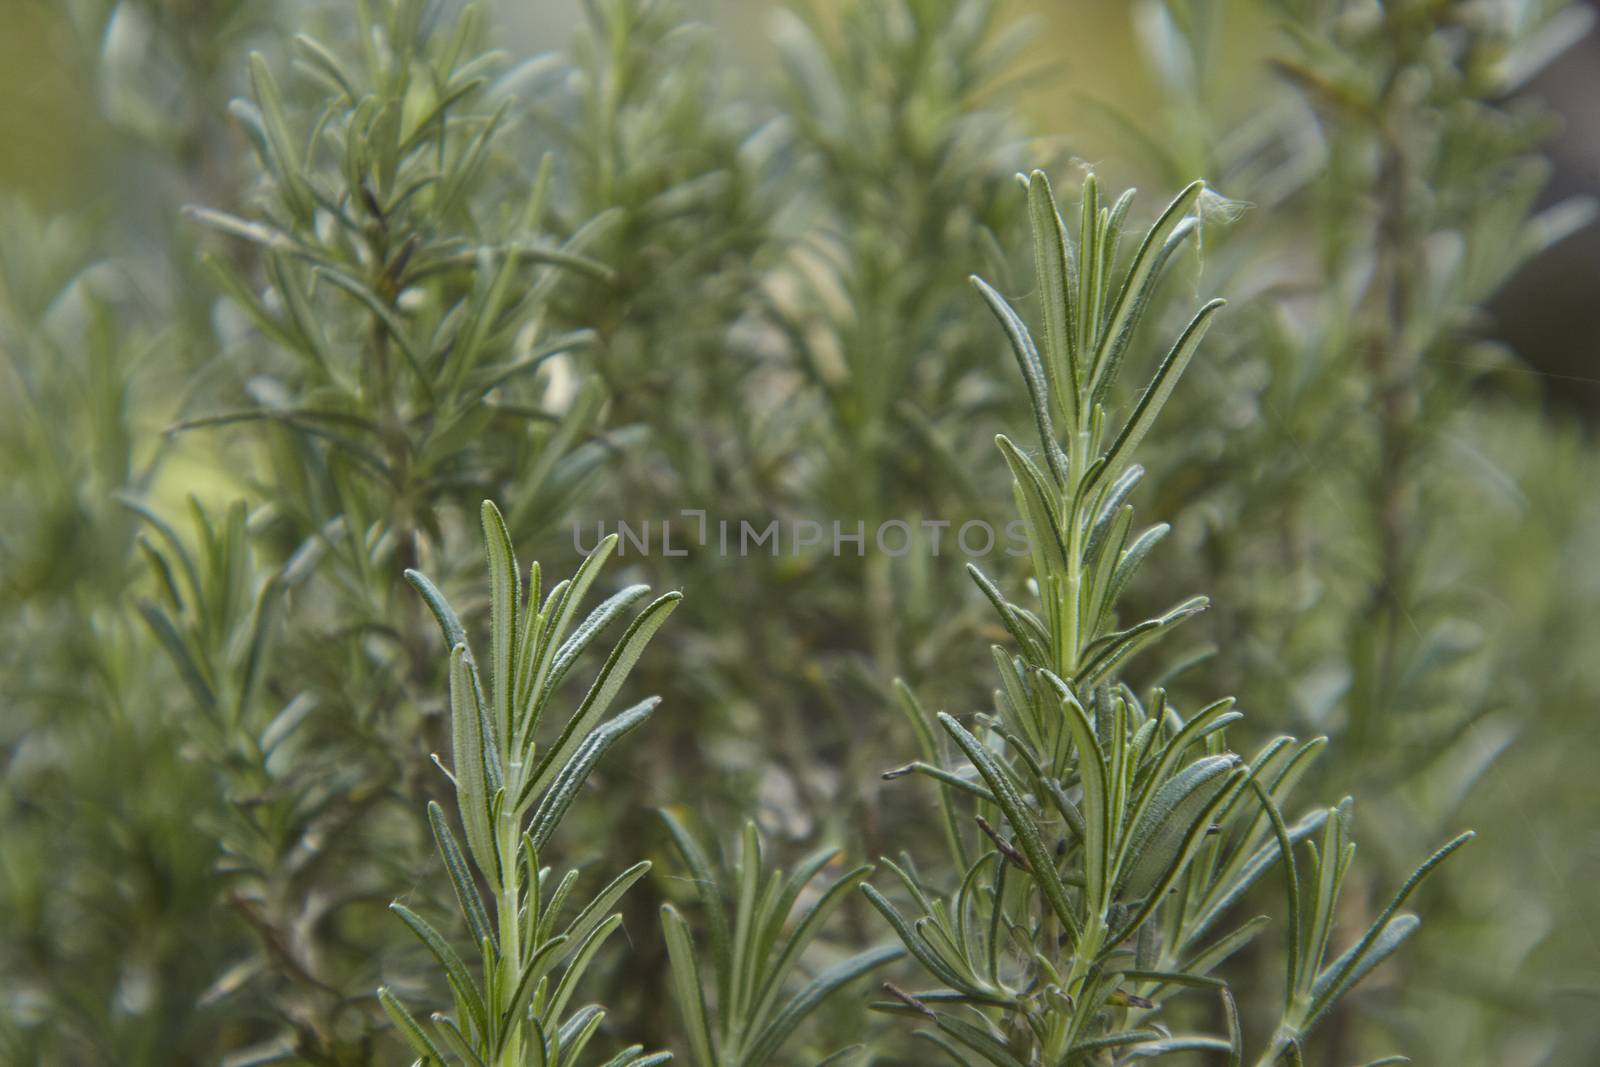 Rosemary leaves: typical plant used as a spice in the kitchen.